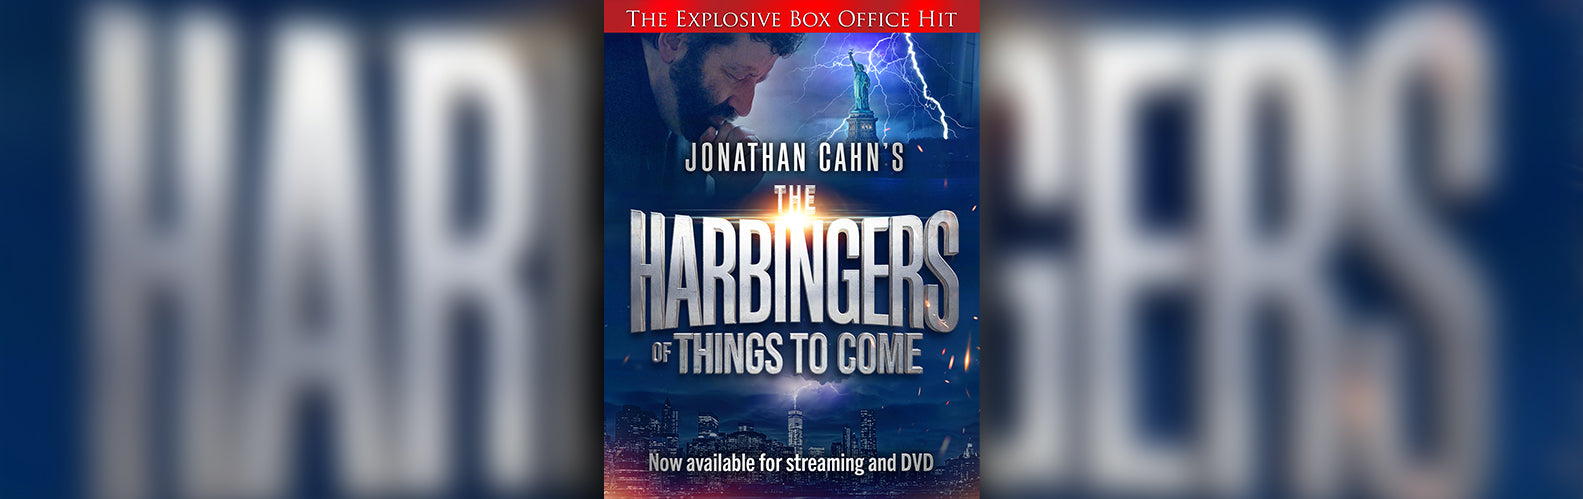 Jonathan Cahn’s blockbuster film ‘The Harbingers of Things to Come’ now available via streaming and DVD